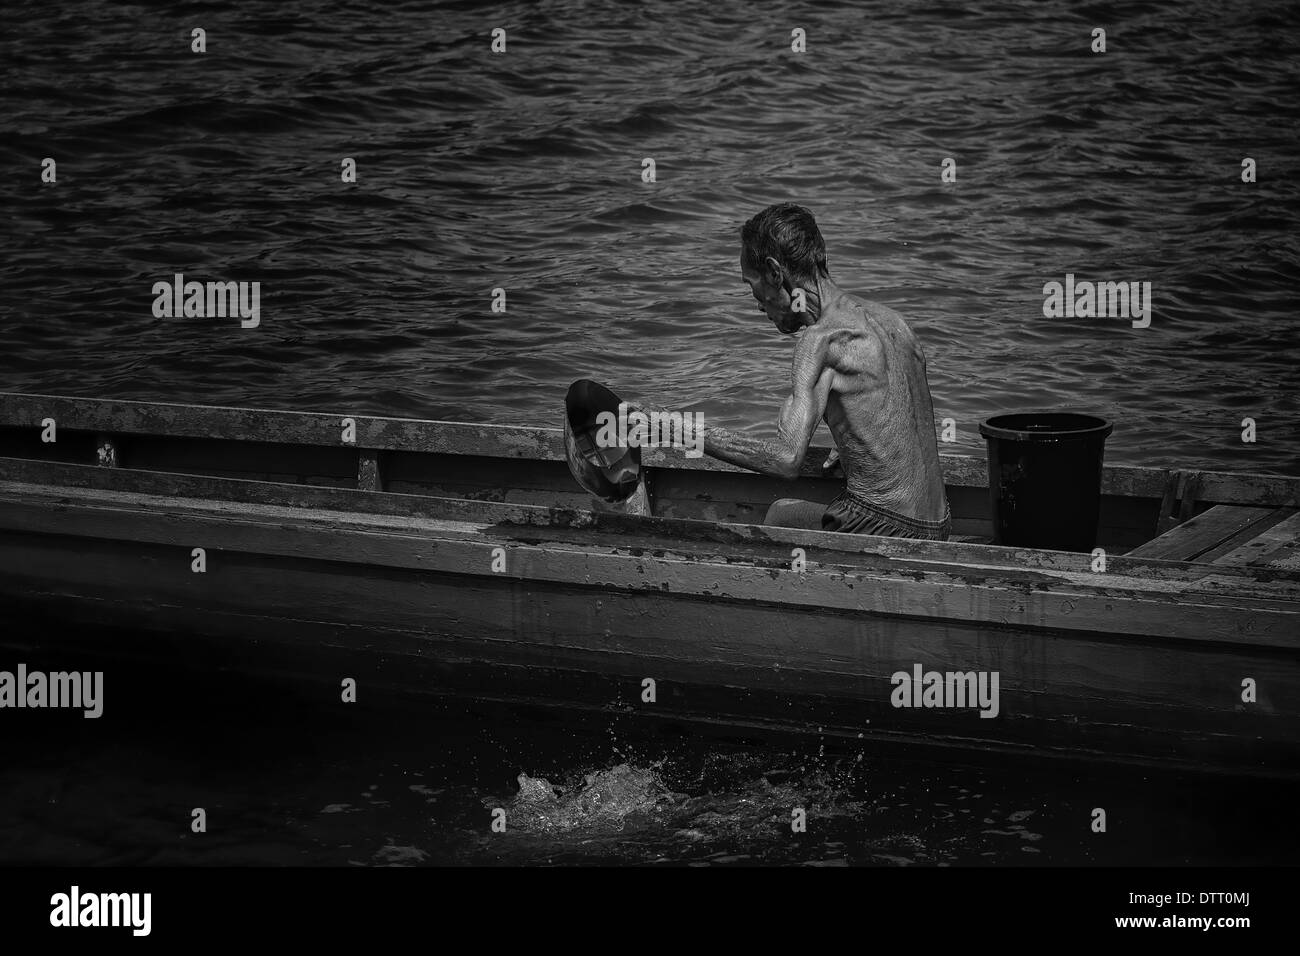 Black and White photo of a fisherman bailing water from his traditional sampan at St. John's Island, Singapore Stock Photo